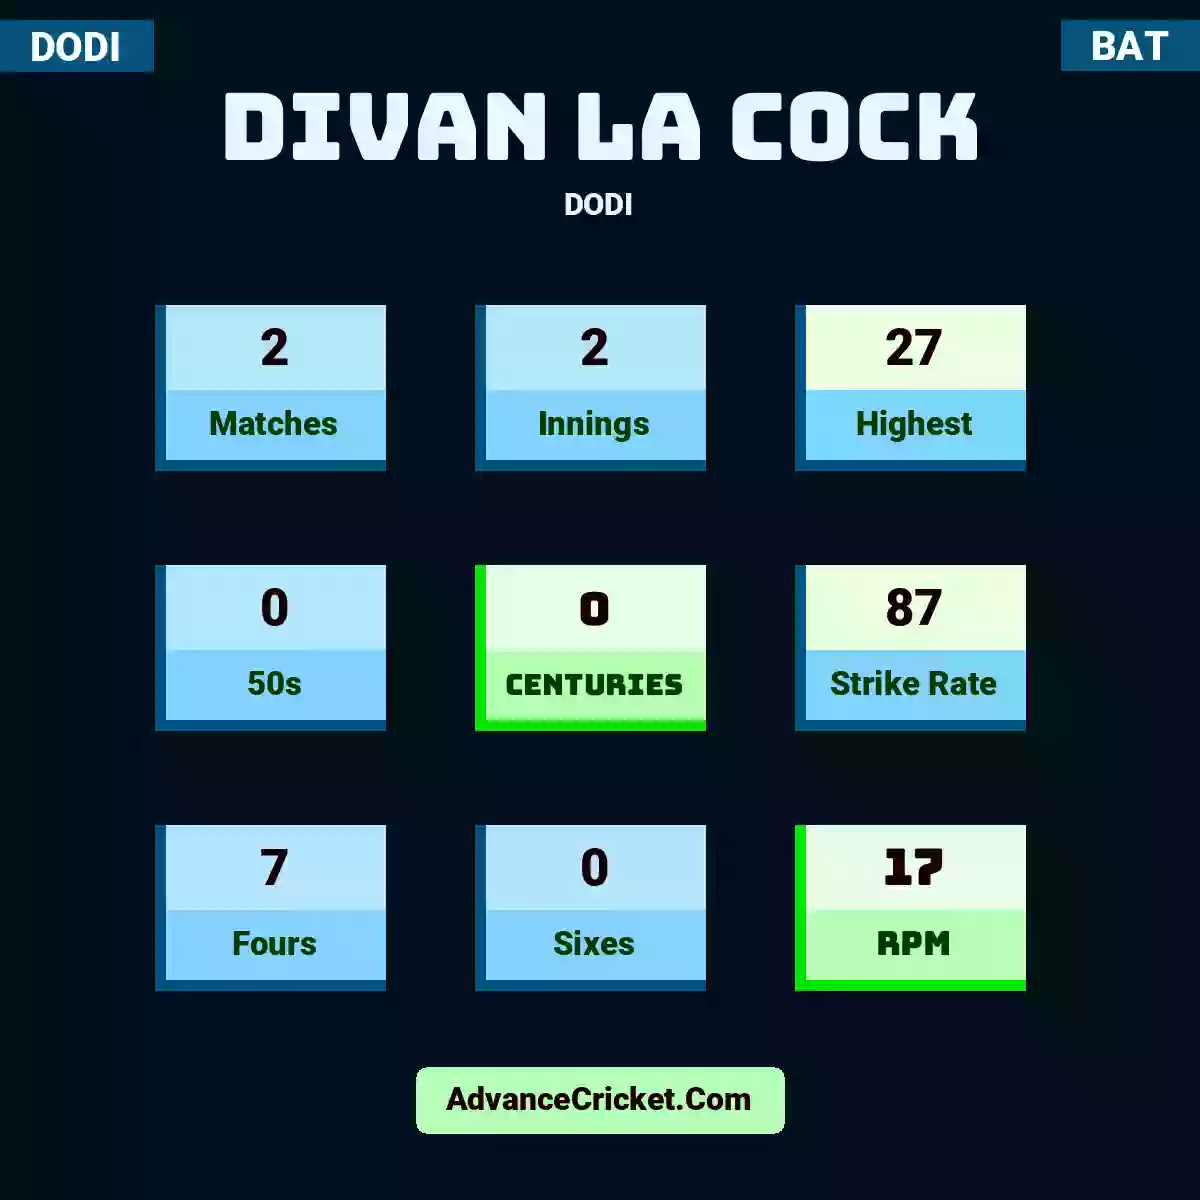 Divan la Cock DODI , Divan la Cock played 2 matches, scored 27 runs as highest, 0 half-centuries, and 0 centuries, with a strike rate of 87. D.Cock hit 7 fours and 0 sixes, with an RPM of 17.